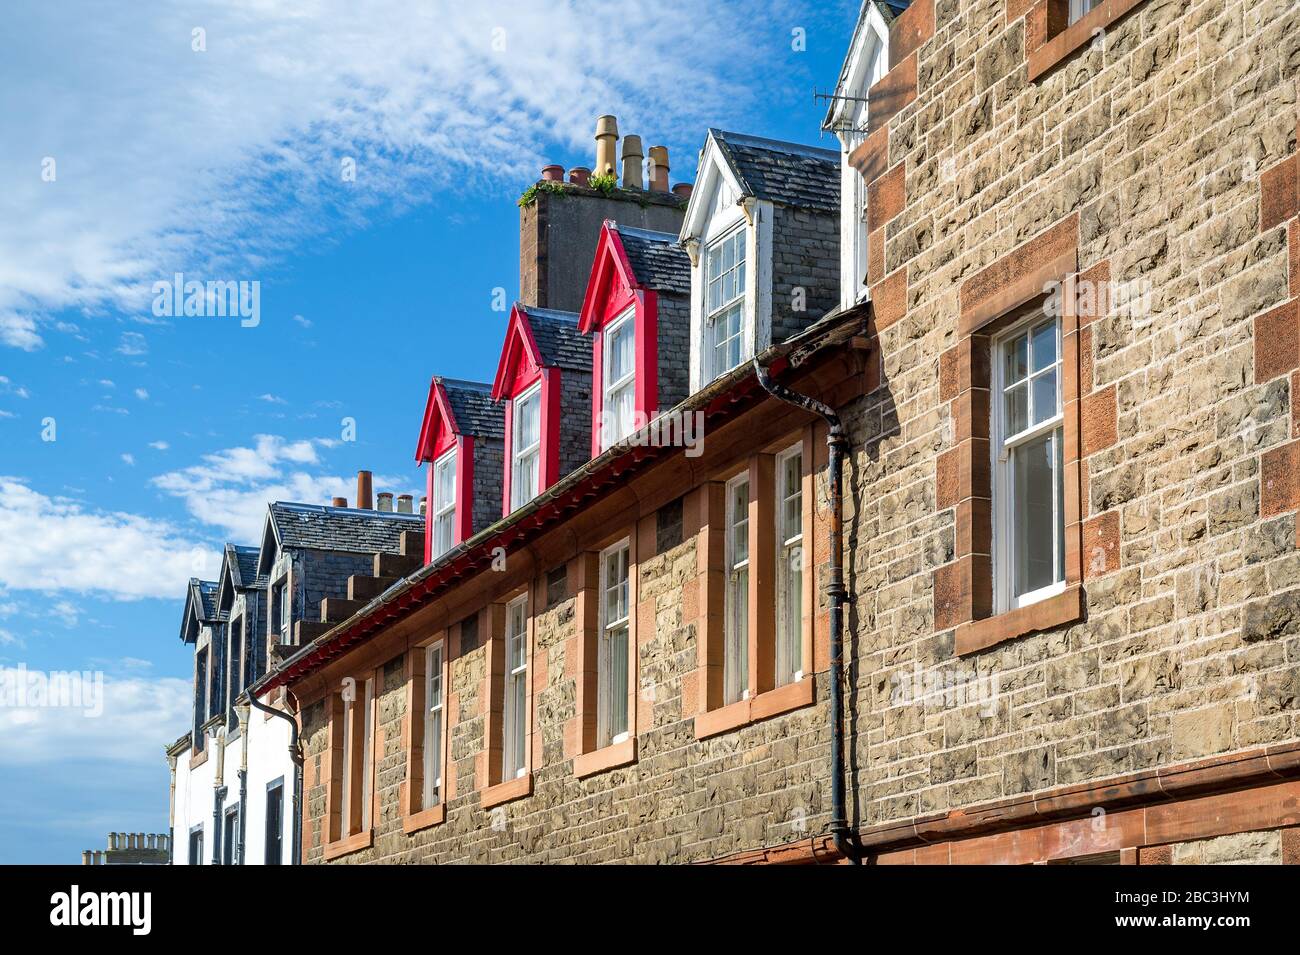 Upper floor of old buildings with colorful decoration. Campbeltown old town, Scotland. Stock Photo